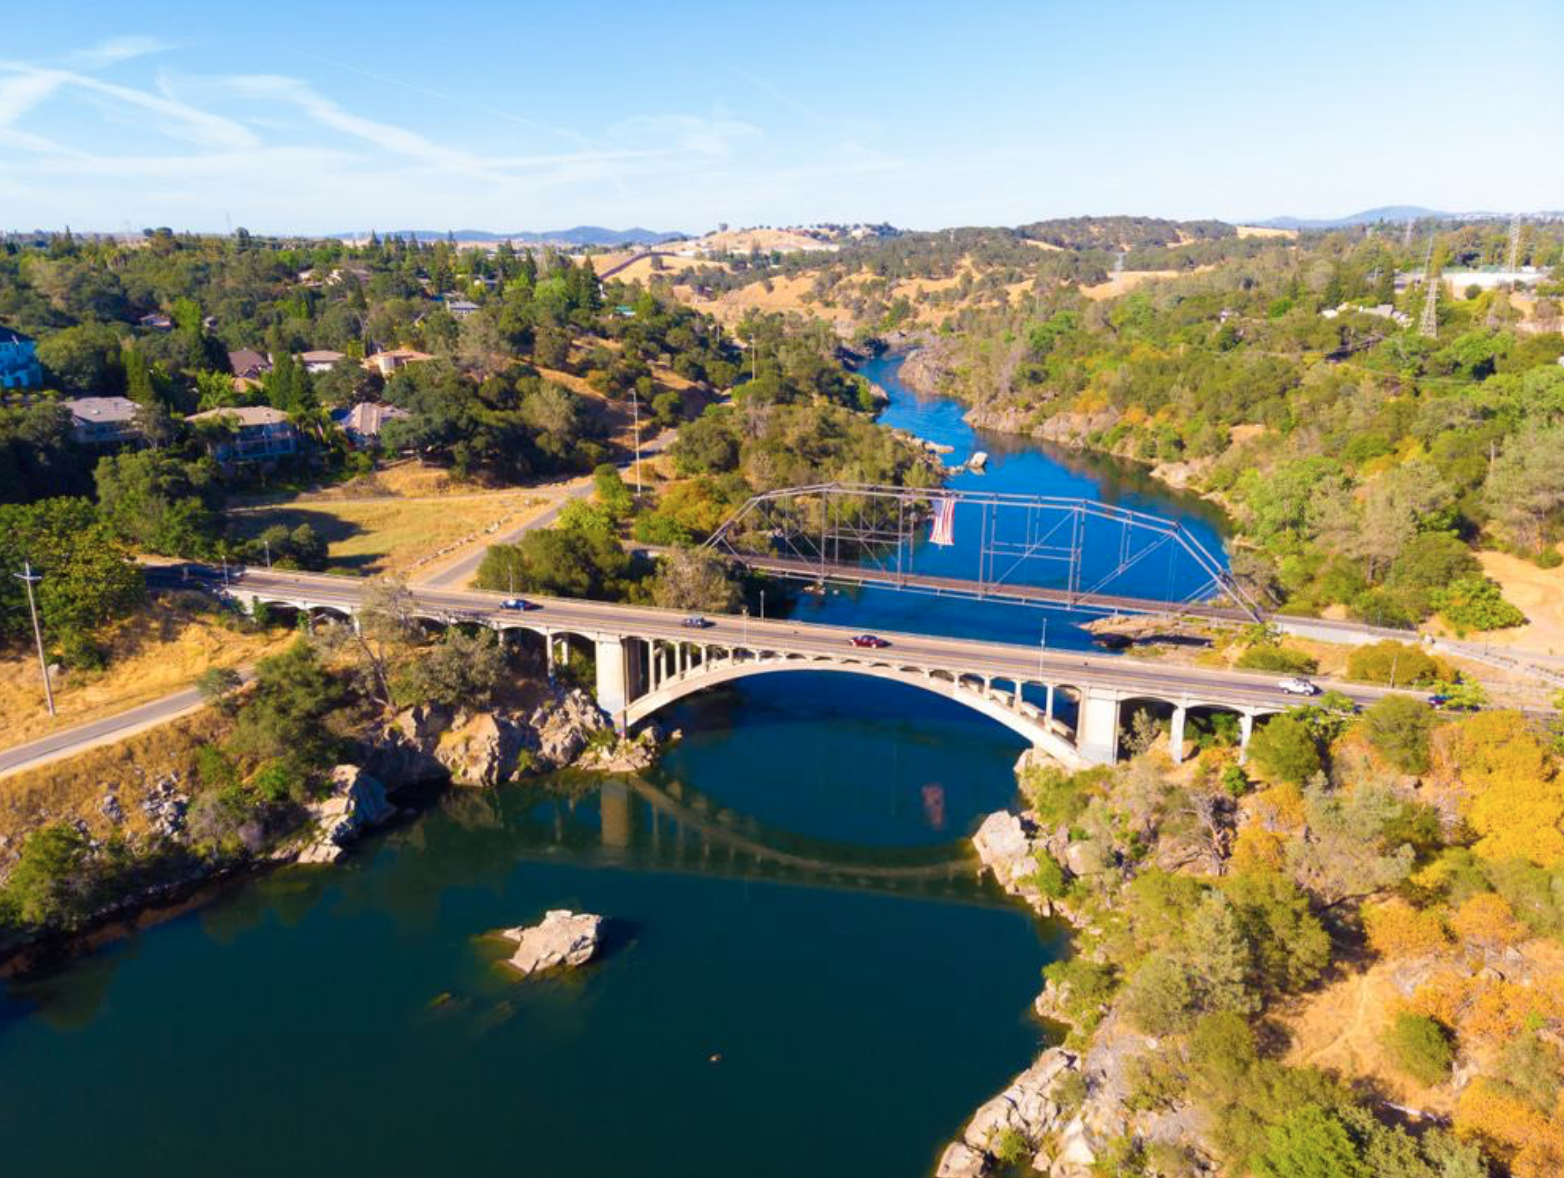 Image of the beautiful city of Folsom